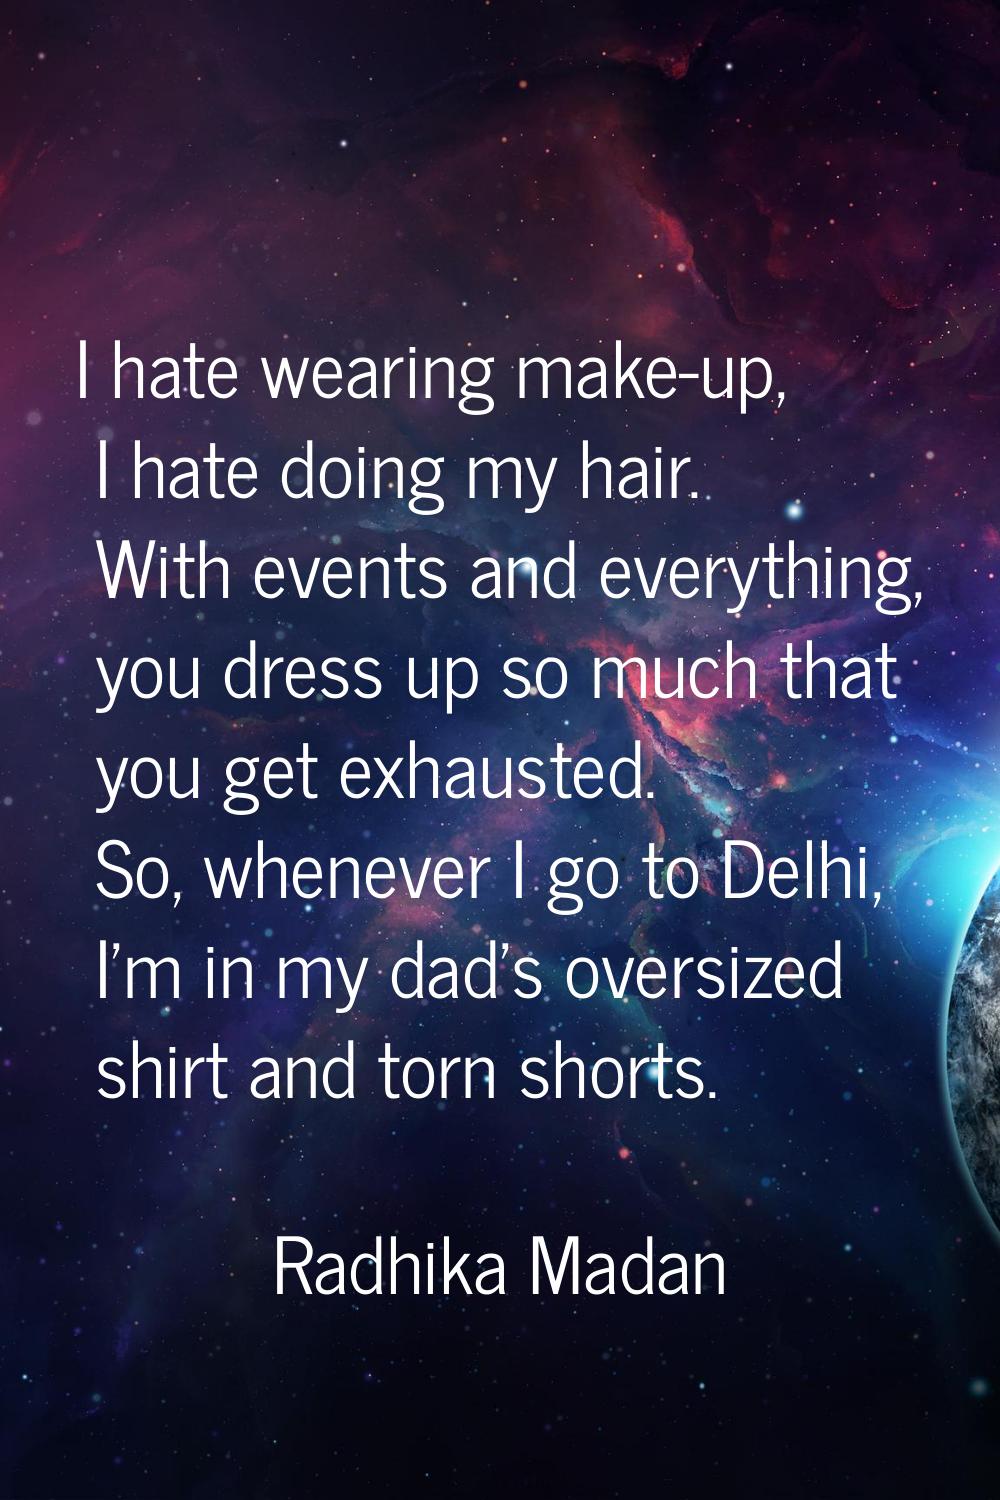 I hate wearing make-up, I hate doing my hair. With events and everything, you dress up so much that